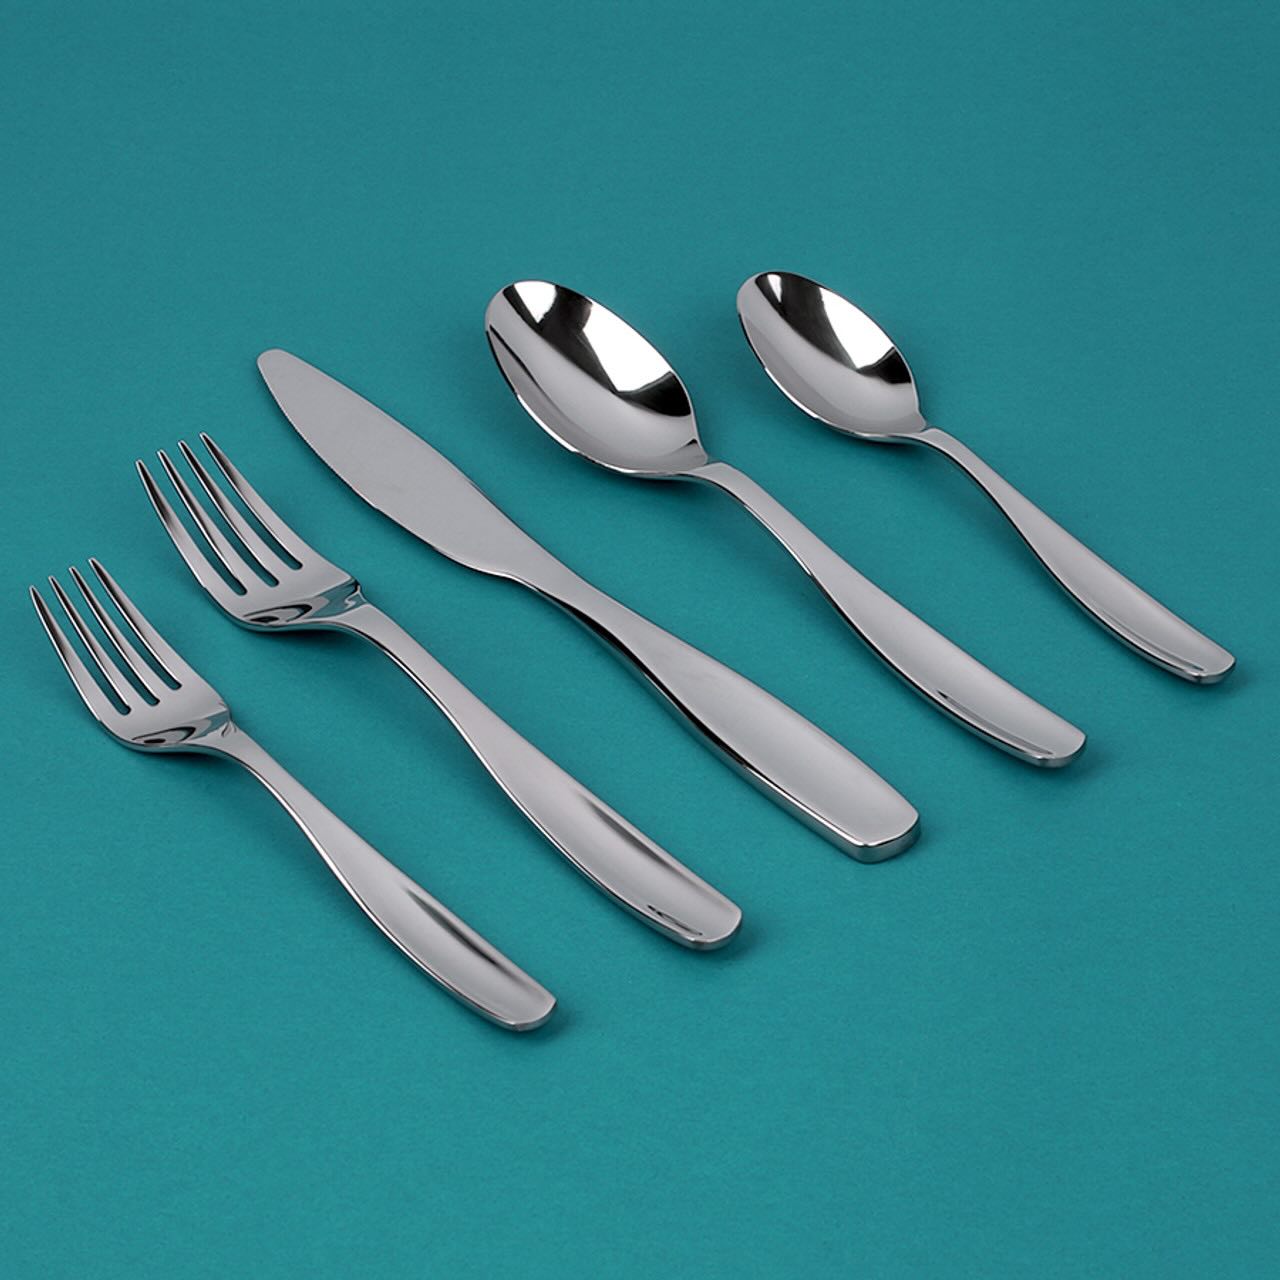 What Is Required For Preset Silverware